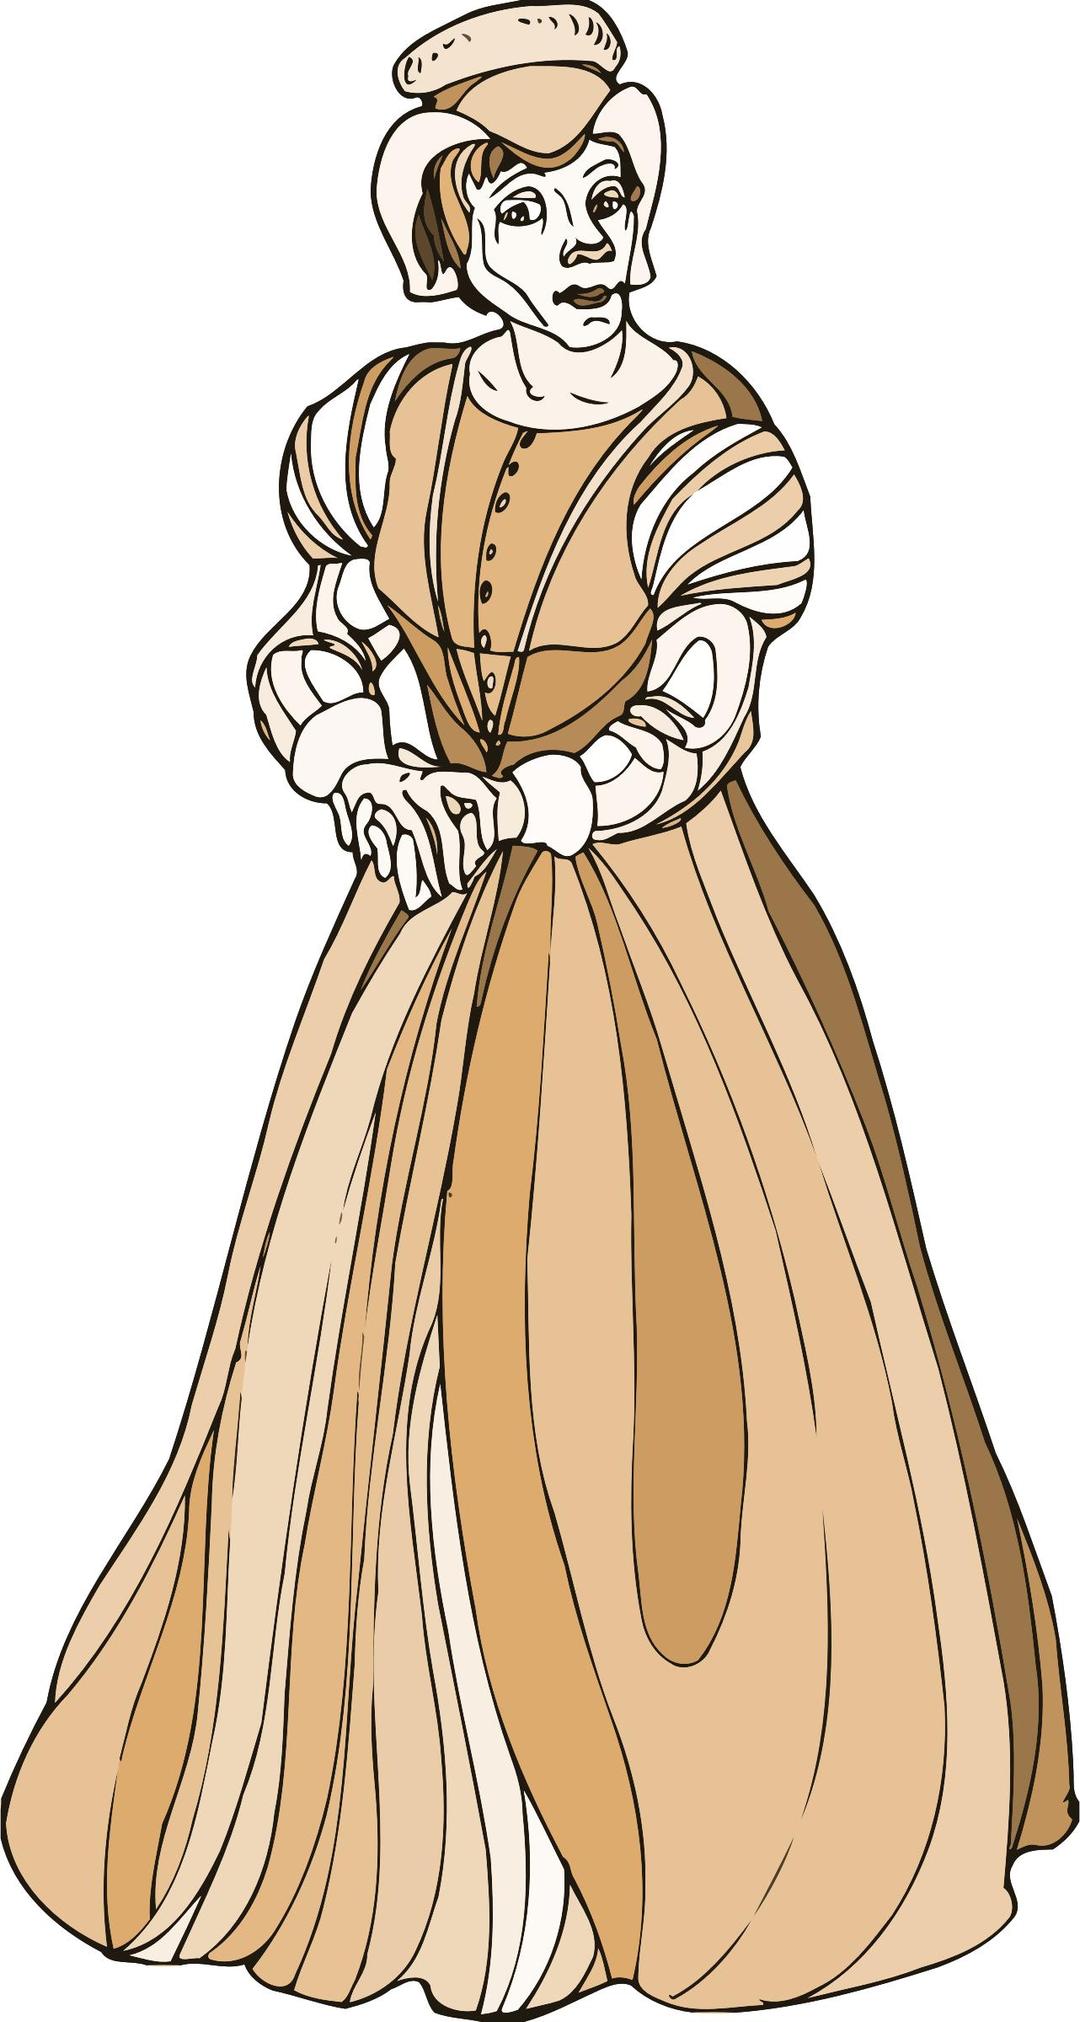 Shakespeare characters - Lady Macbeth 2 png transparent